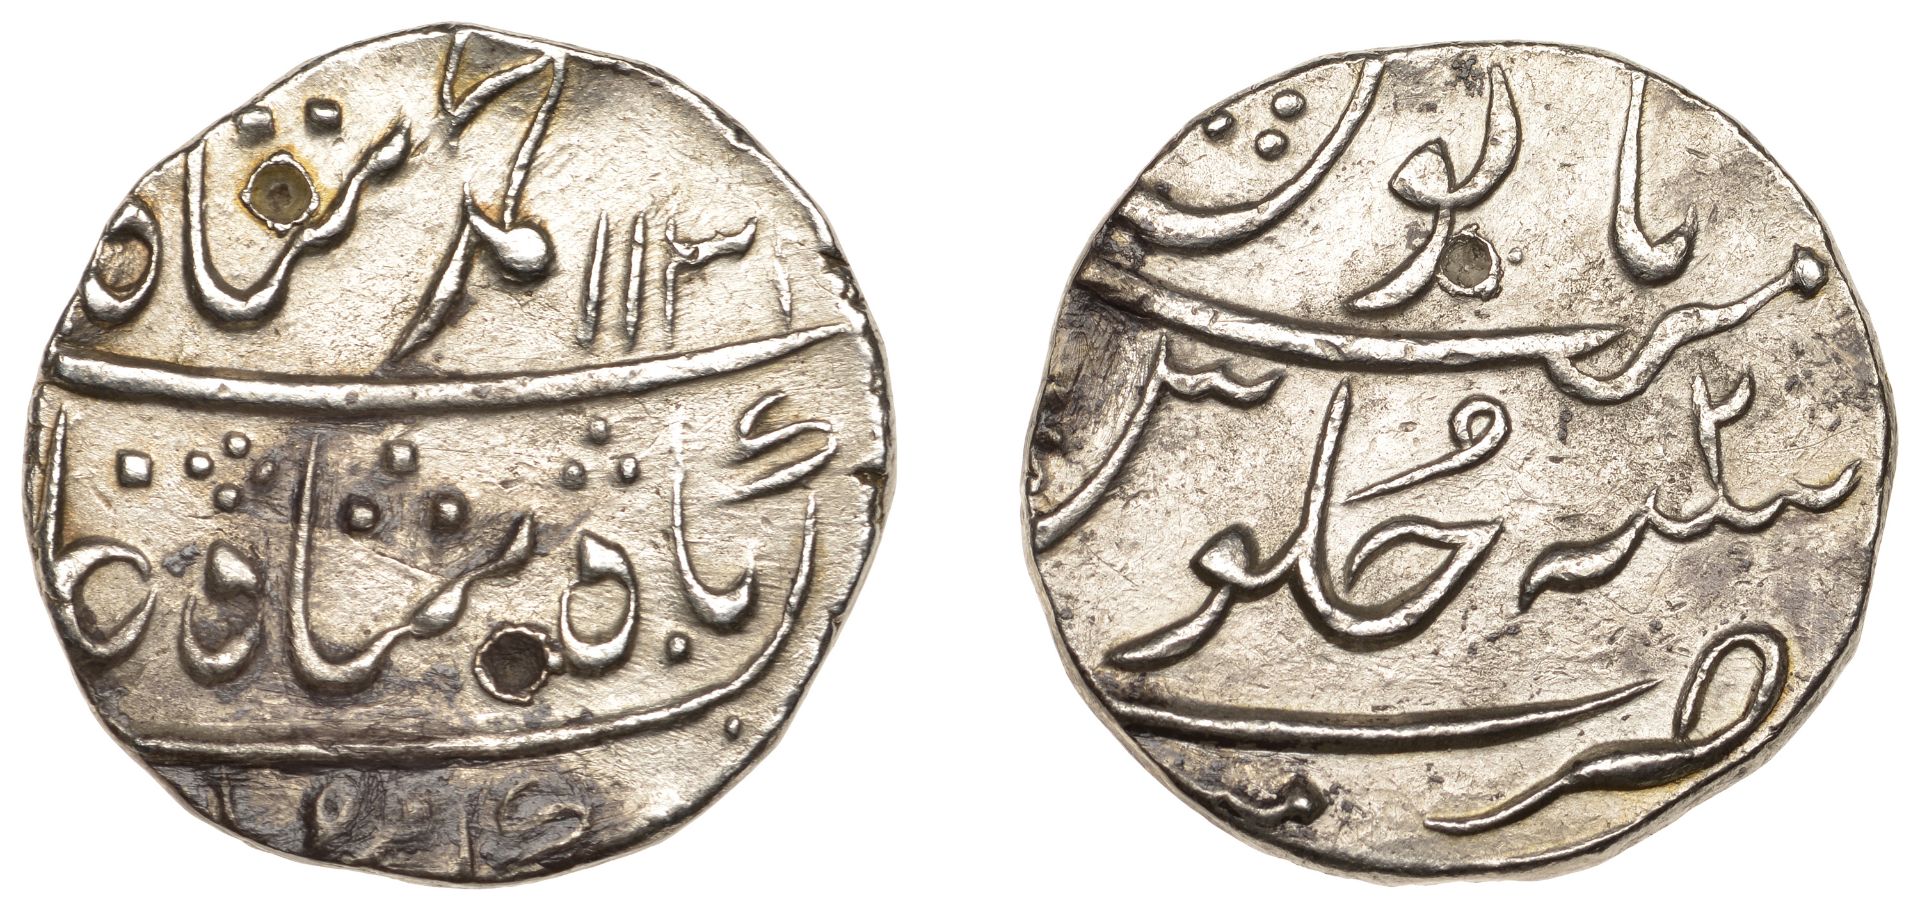 East India Company, Bombay Presidency, Early coinages: Mughal style, silver Rupee in the nam...